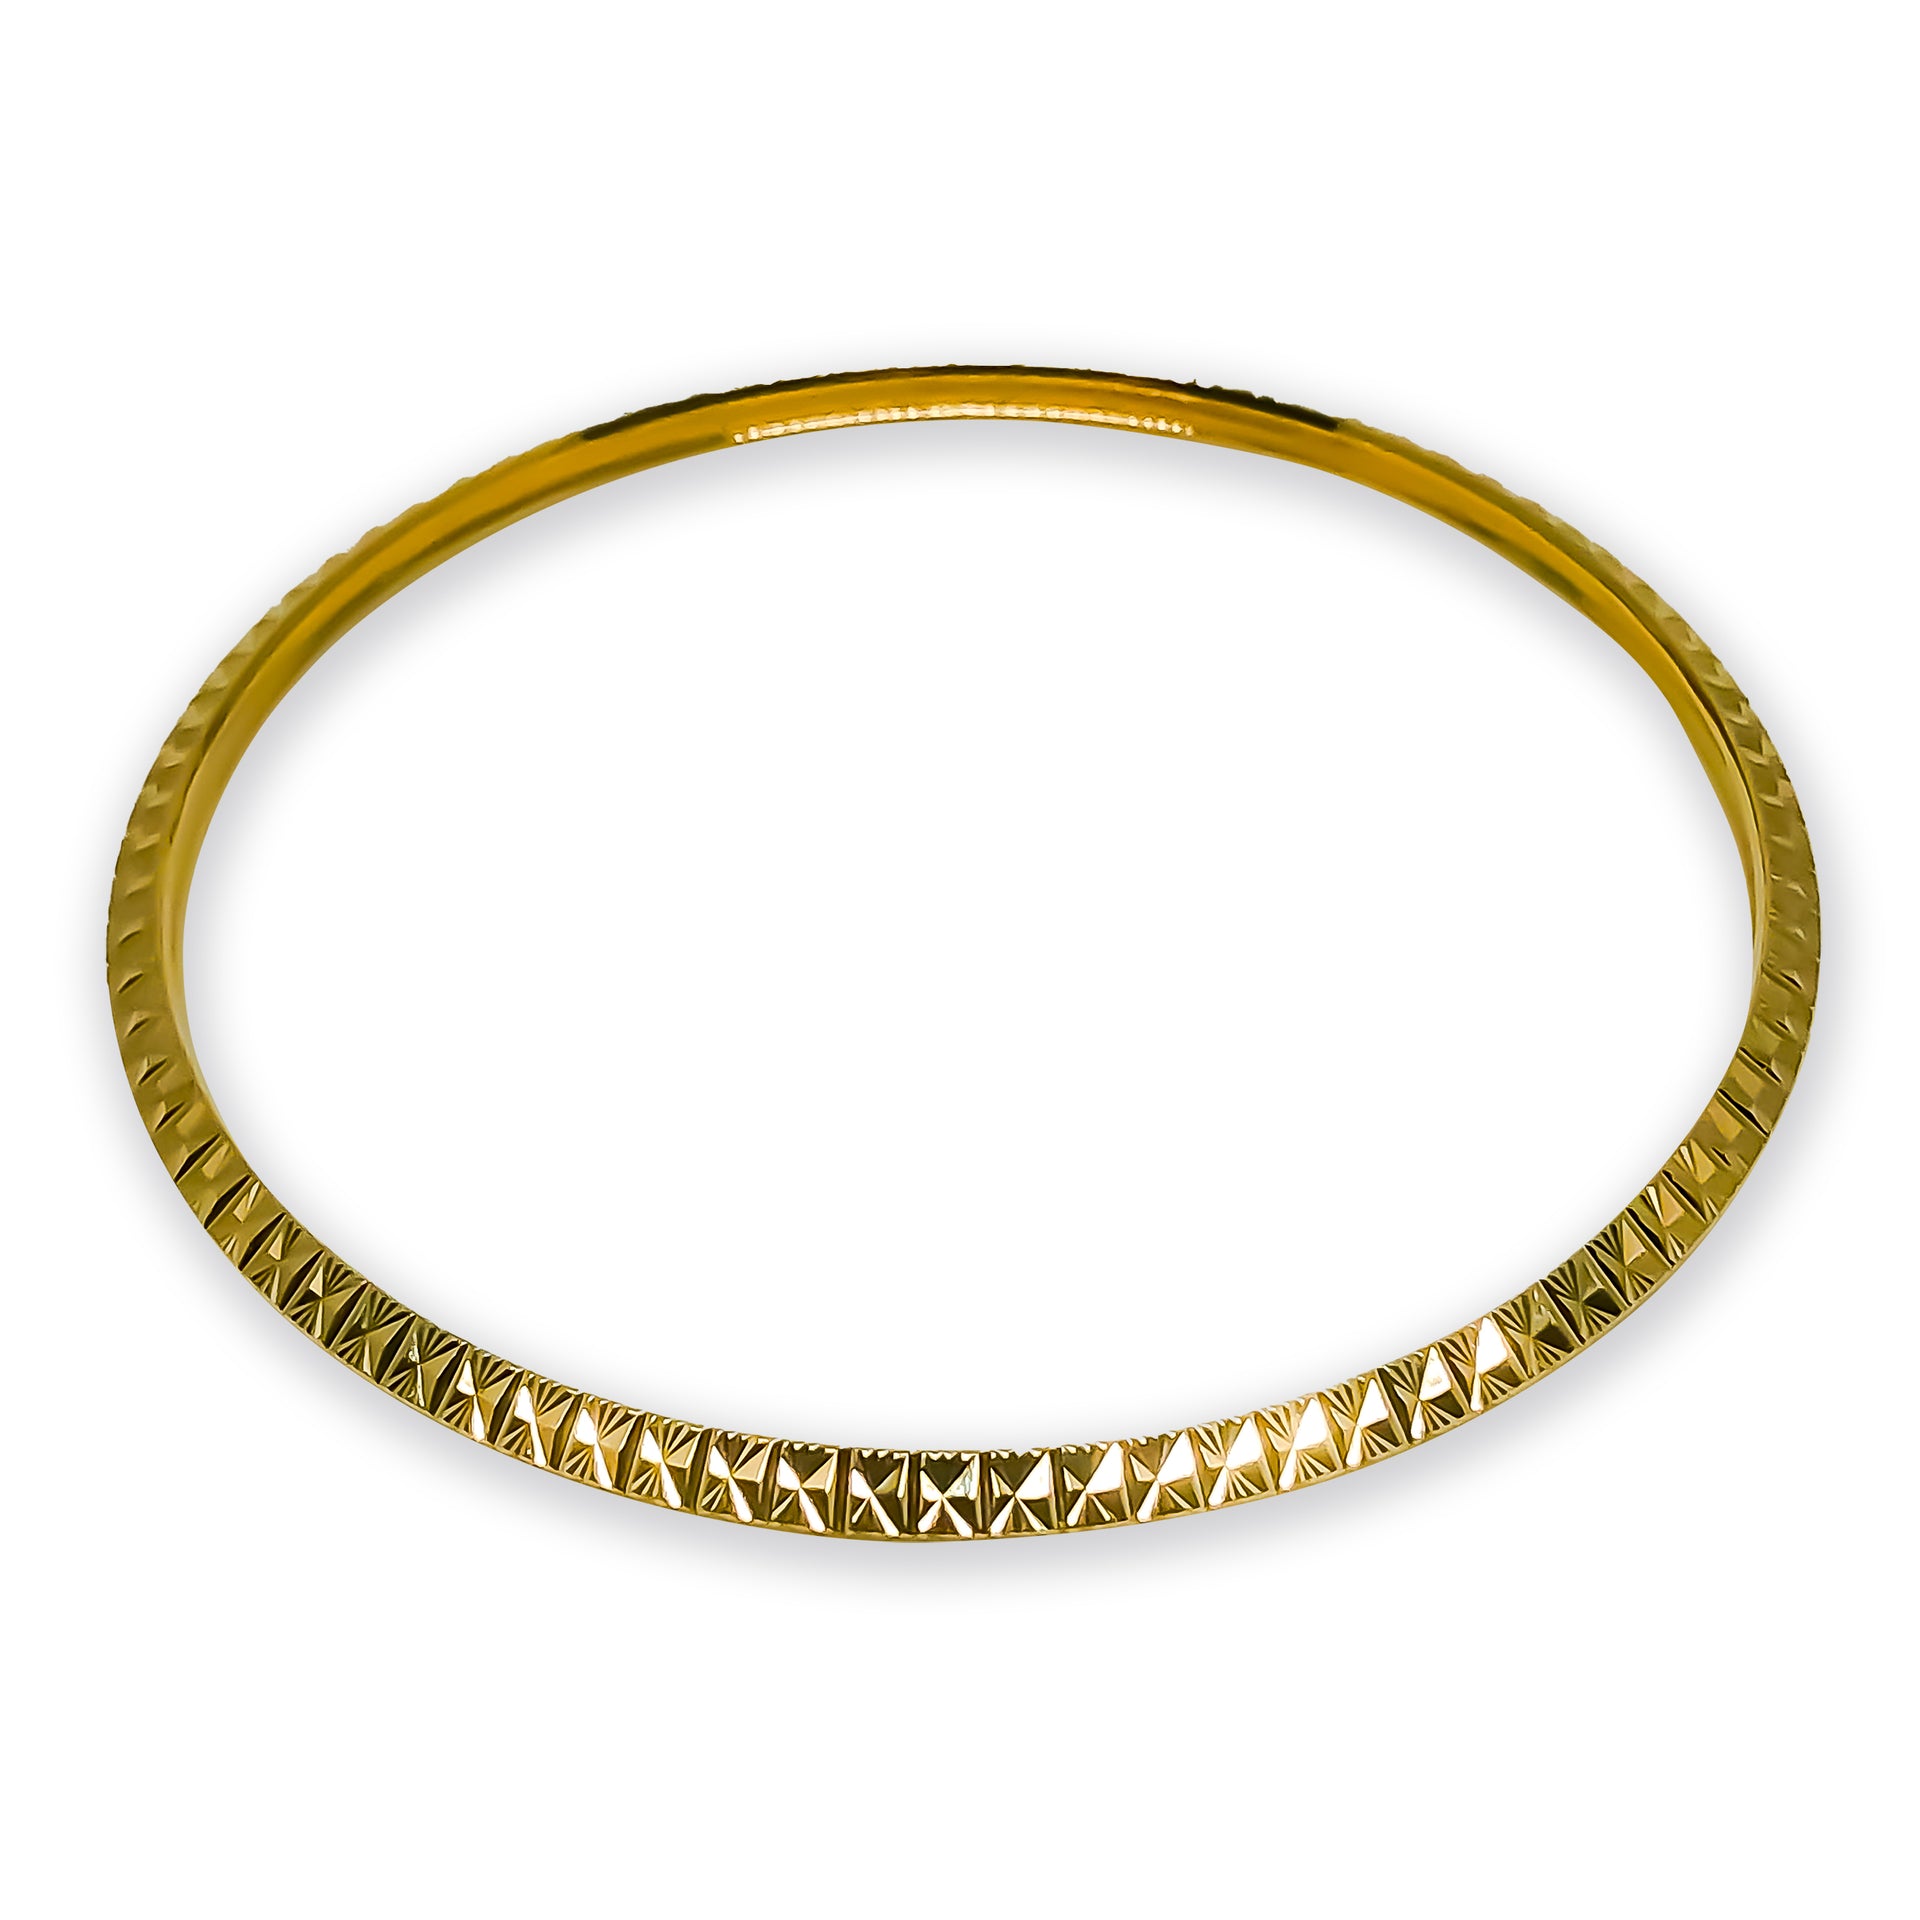 Bangle EARTH IS ROUND 3mm with triangle profile design yellow gold 18k 750